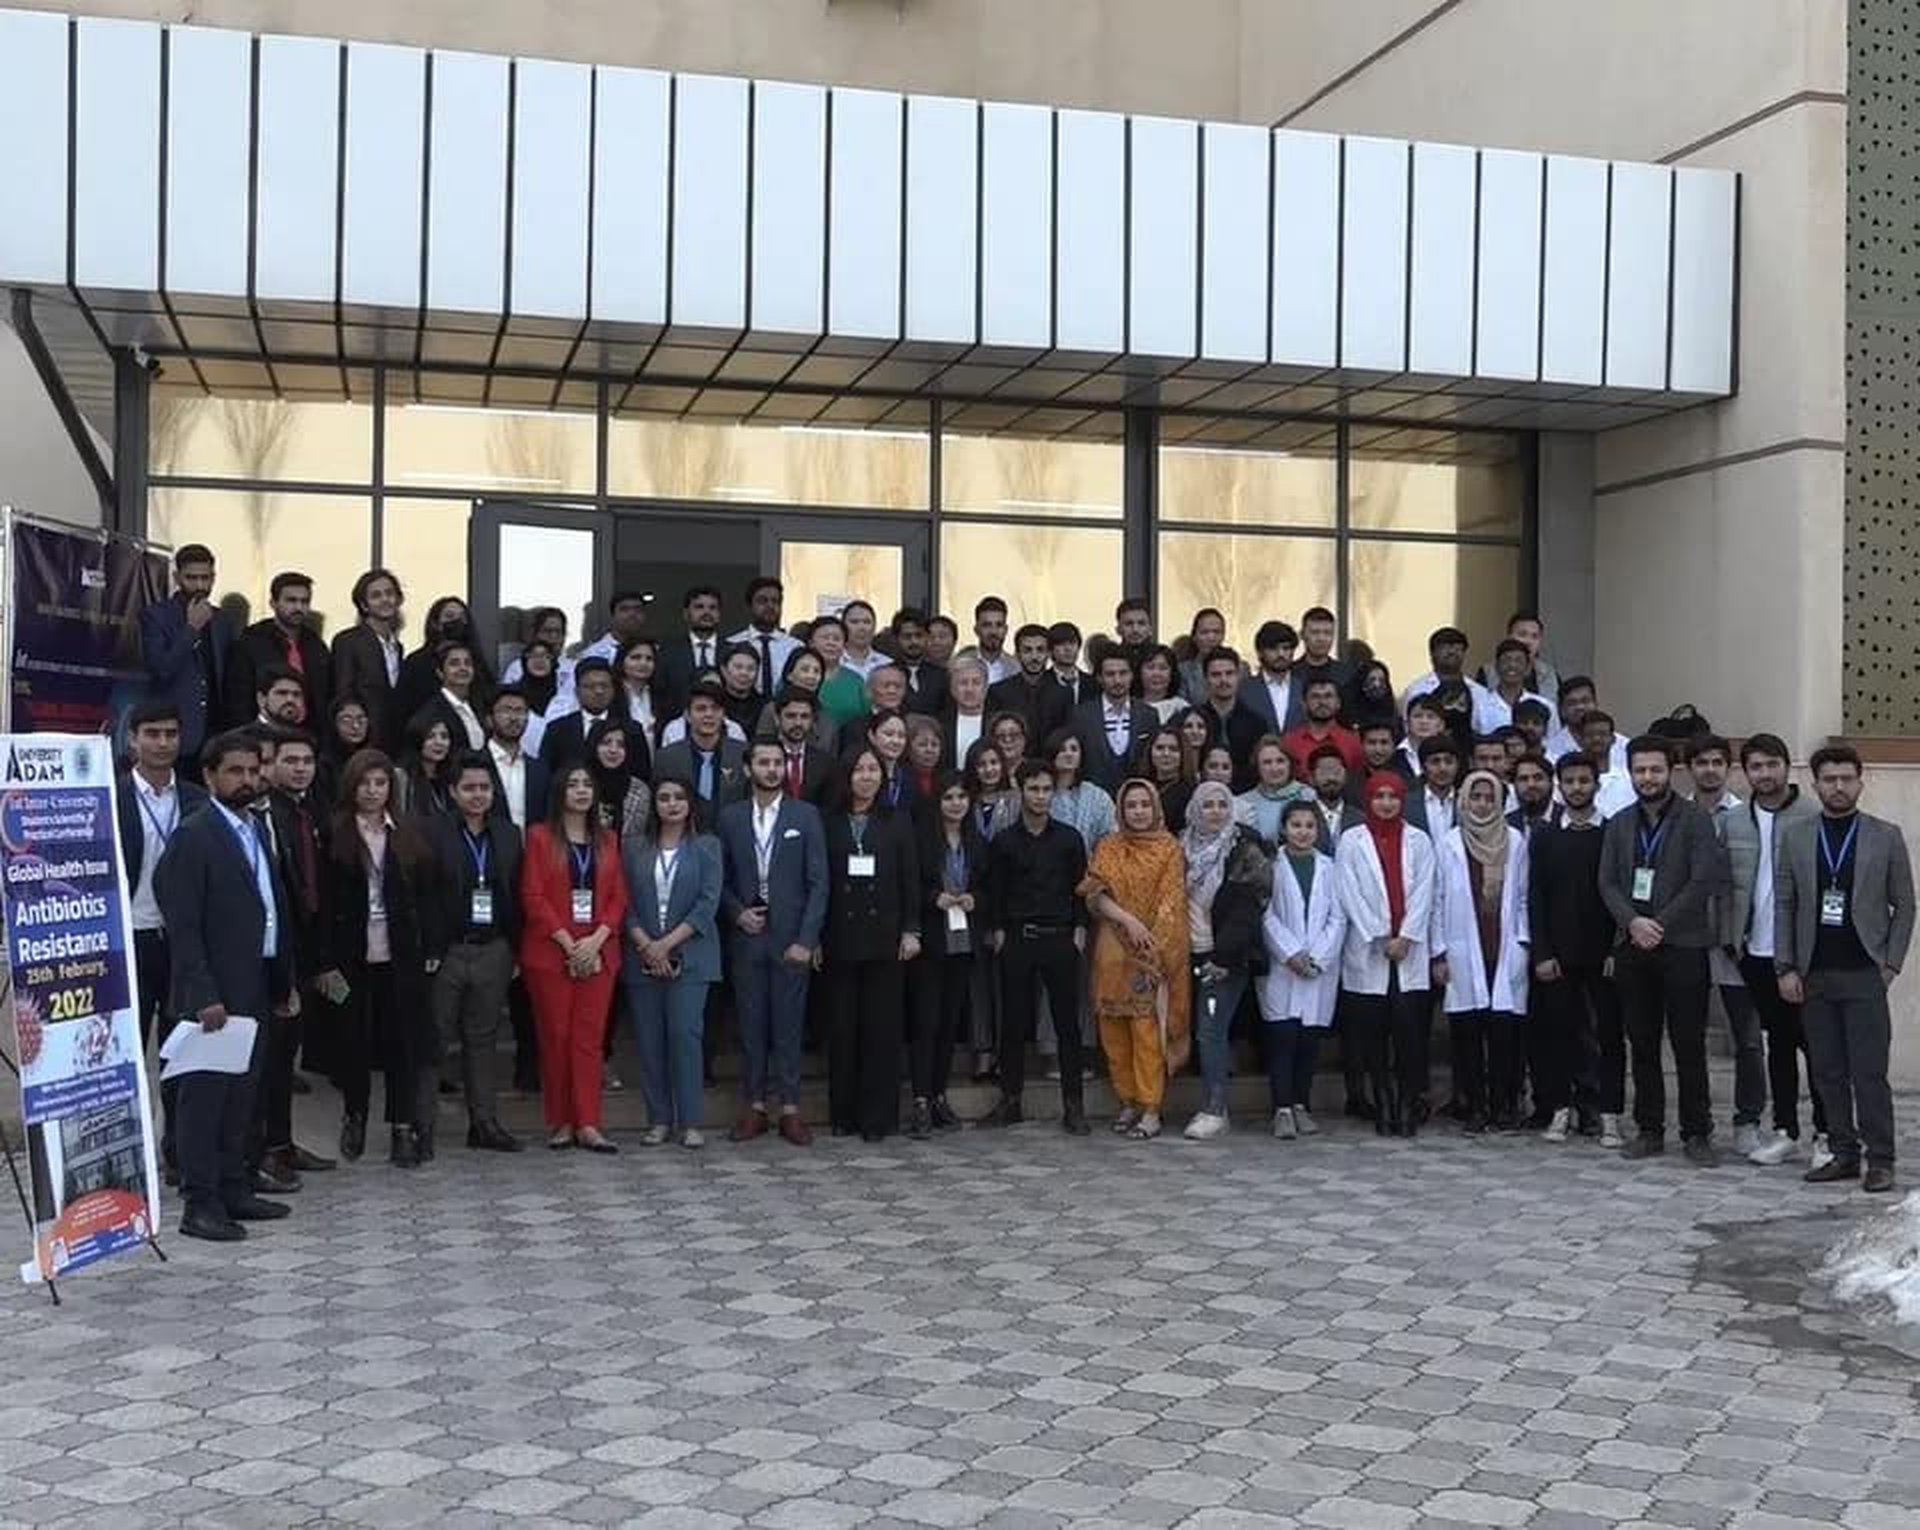 Let's remember how the International Scientific-Practical Conference "Global health issues: antibiotic resistance" was held at our University where 65 works of students from 9 universities of the country were presented.